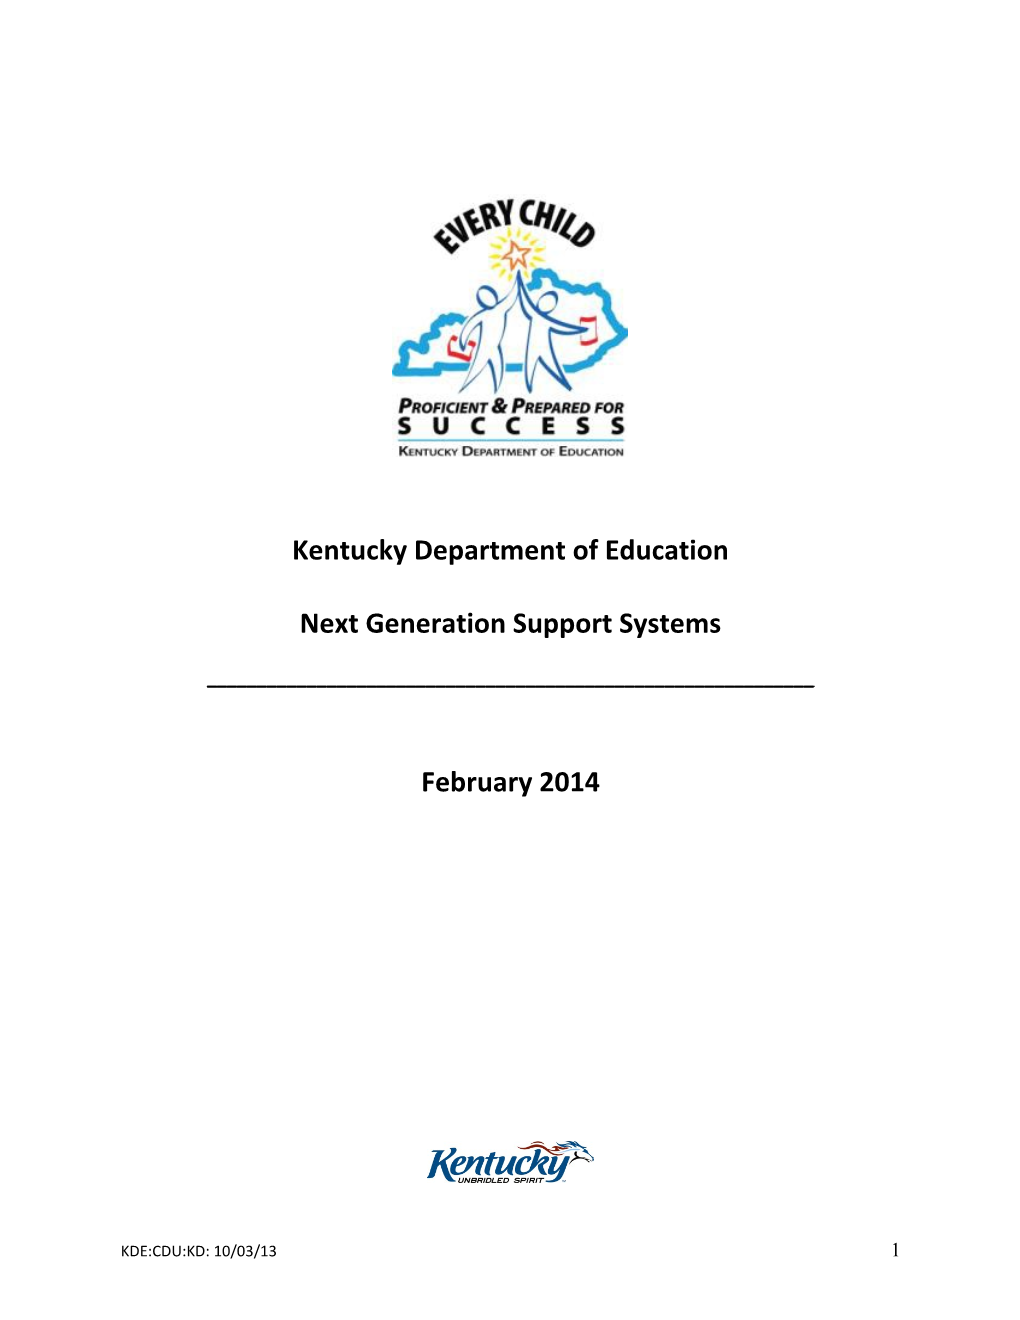 Next Generation Support Systems